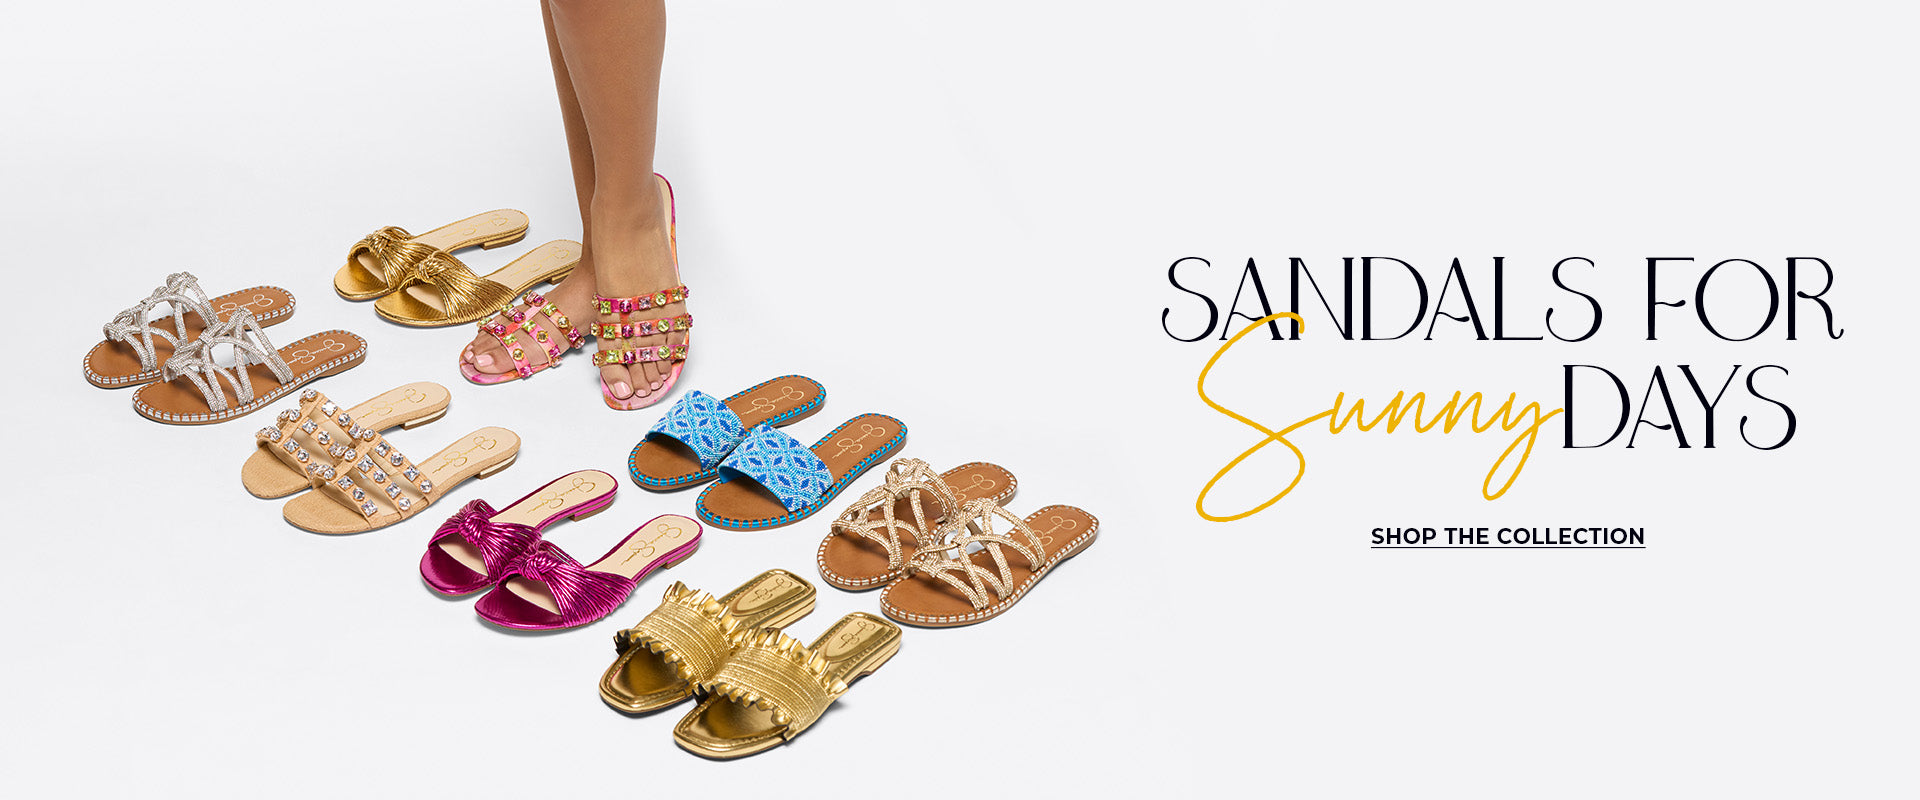 Sandals for Sunny Days shop the collection leads to sandals